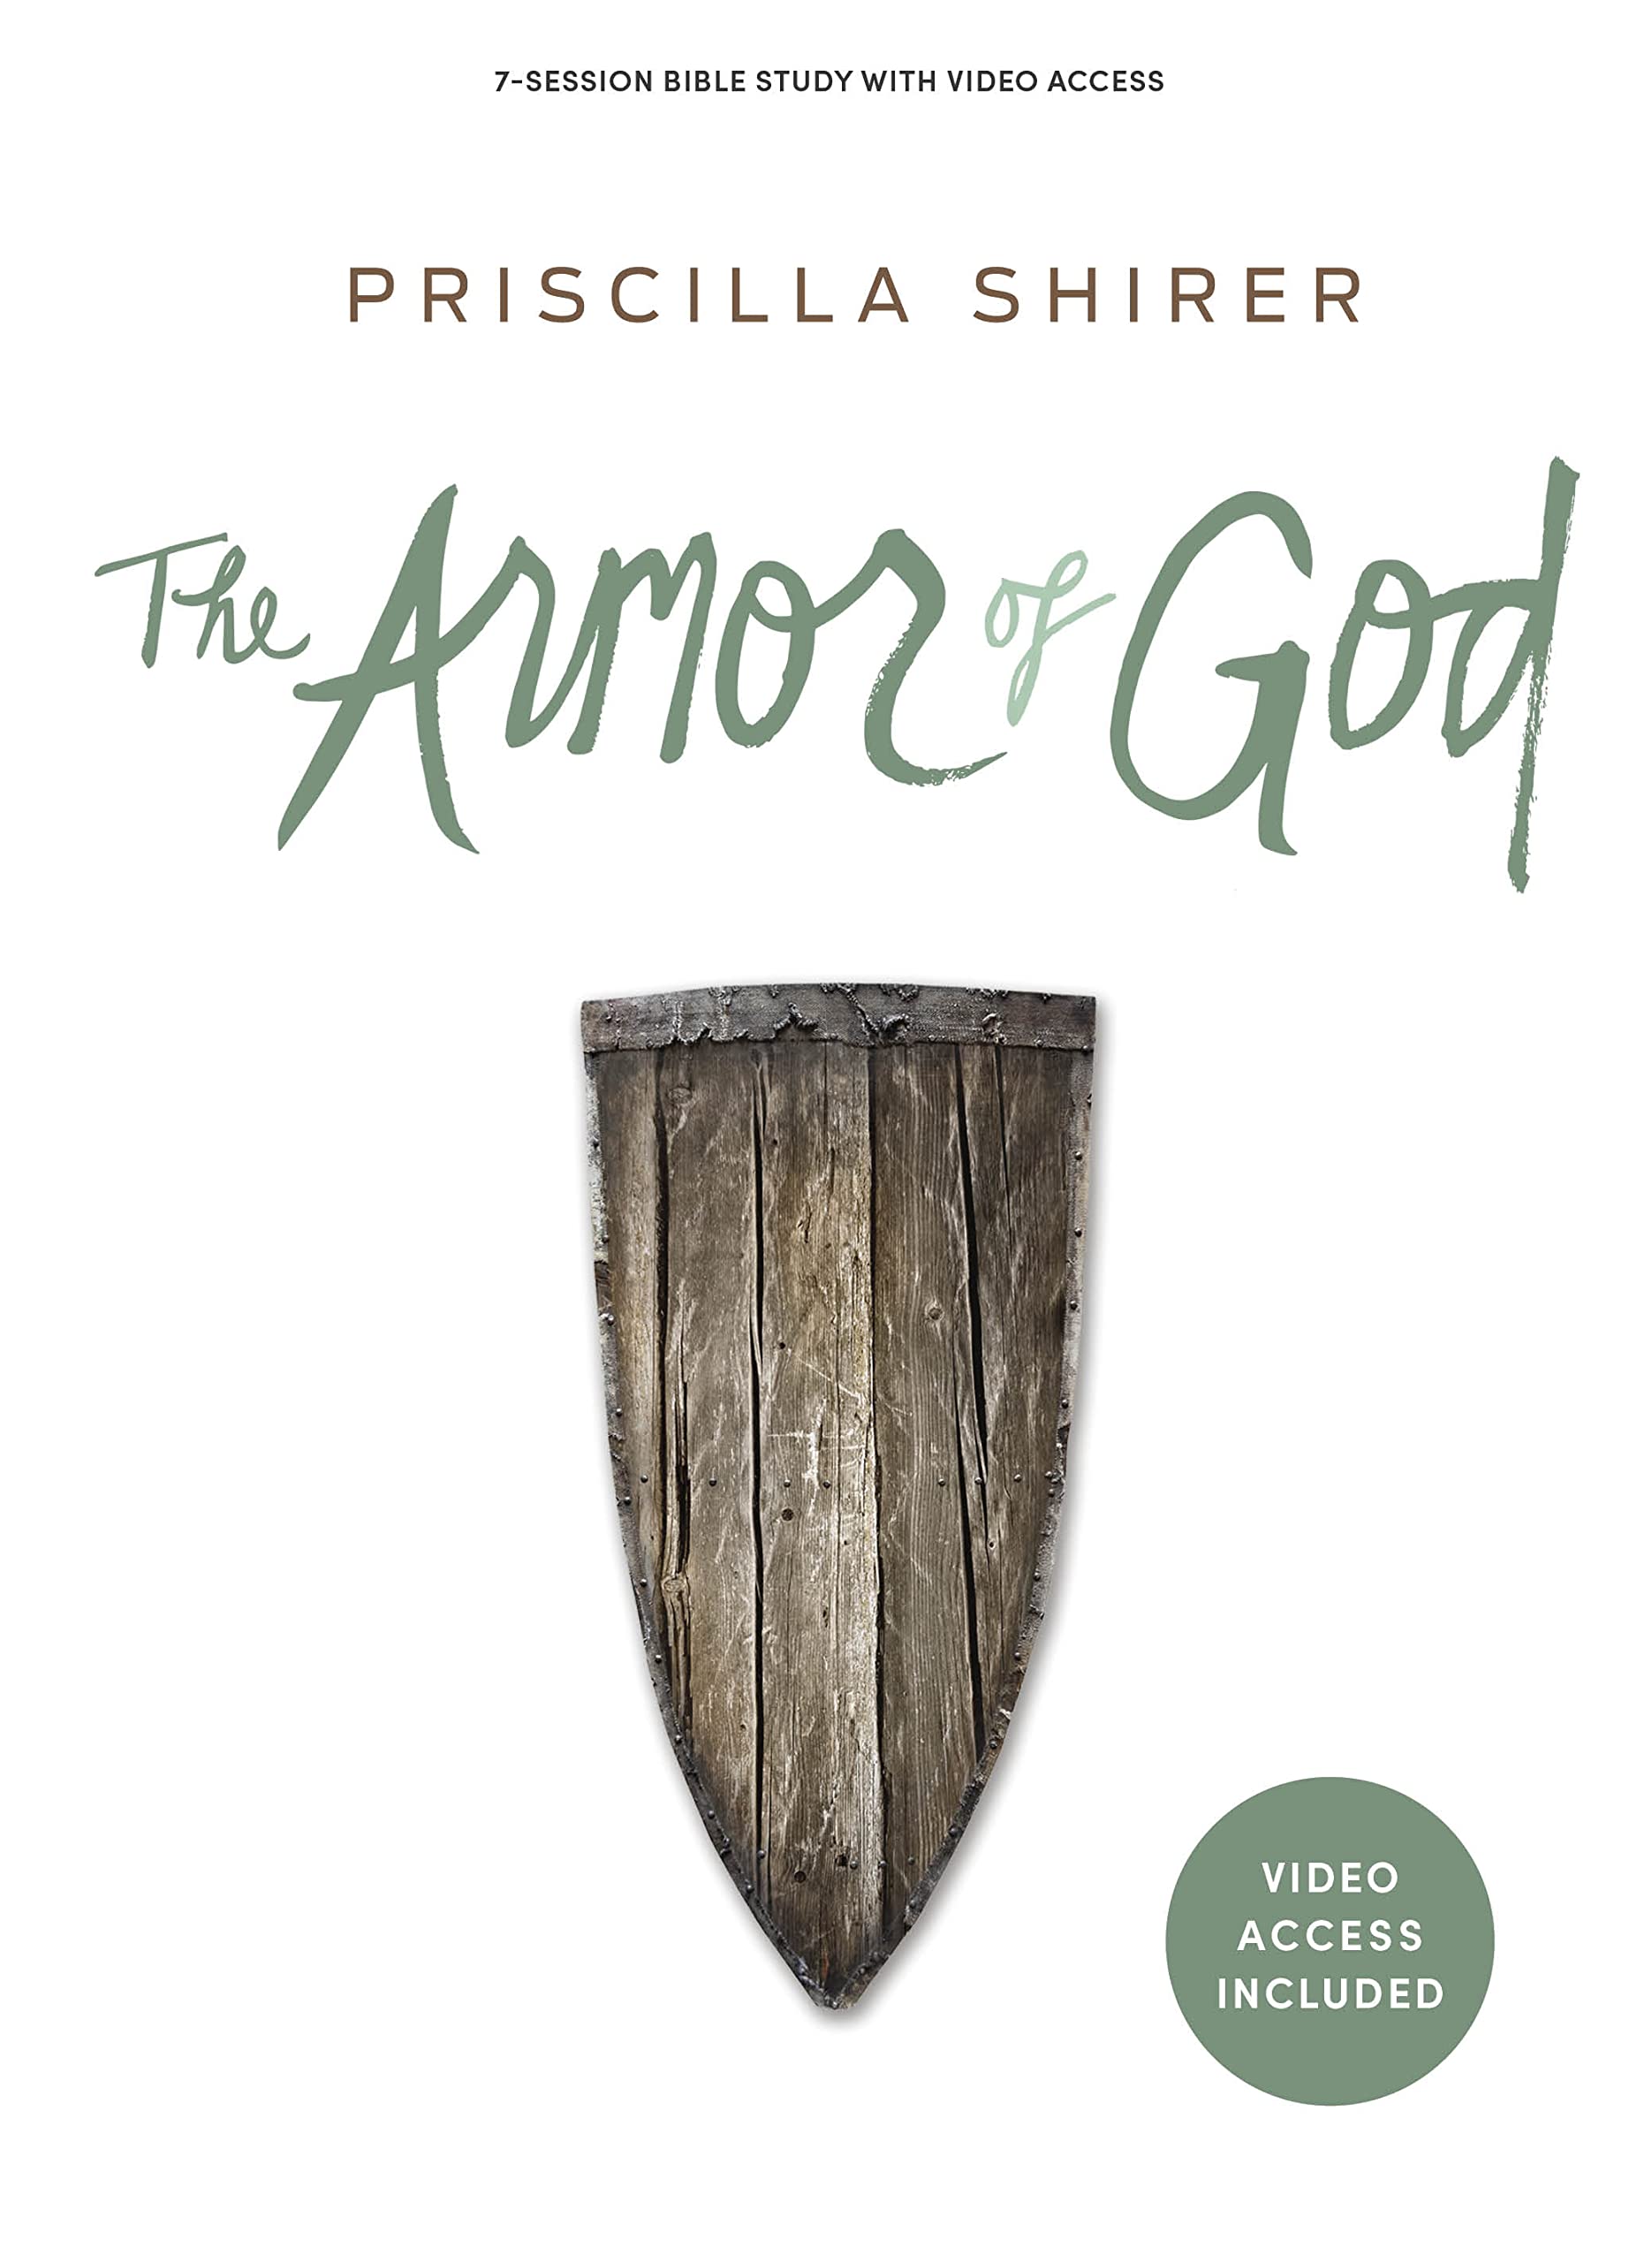 The Armor of God - Bible Study Book with Video Access by Shirer, Priscilla